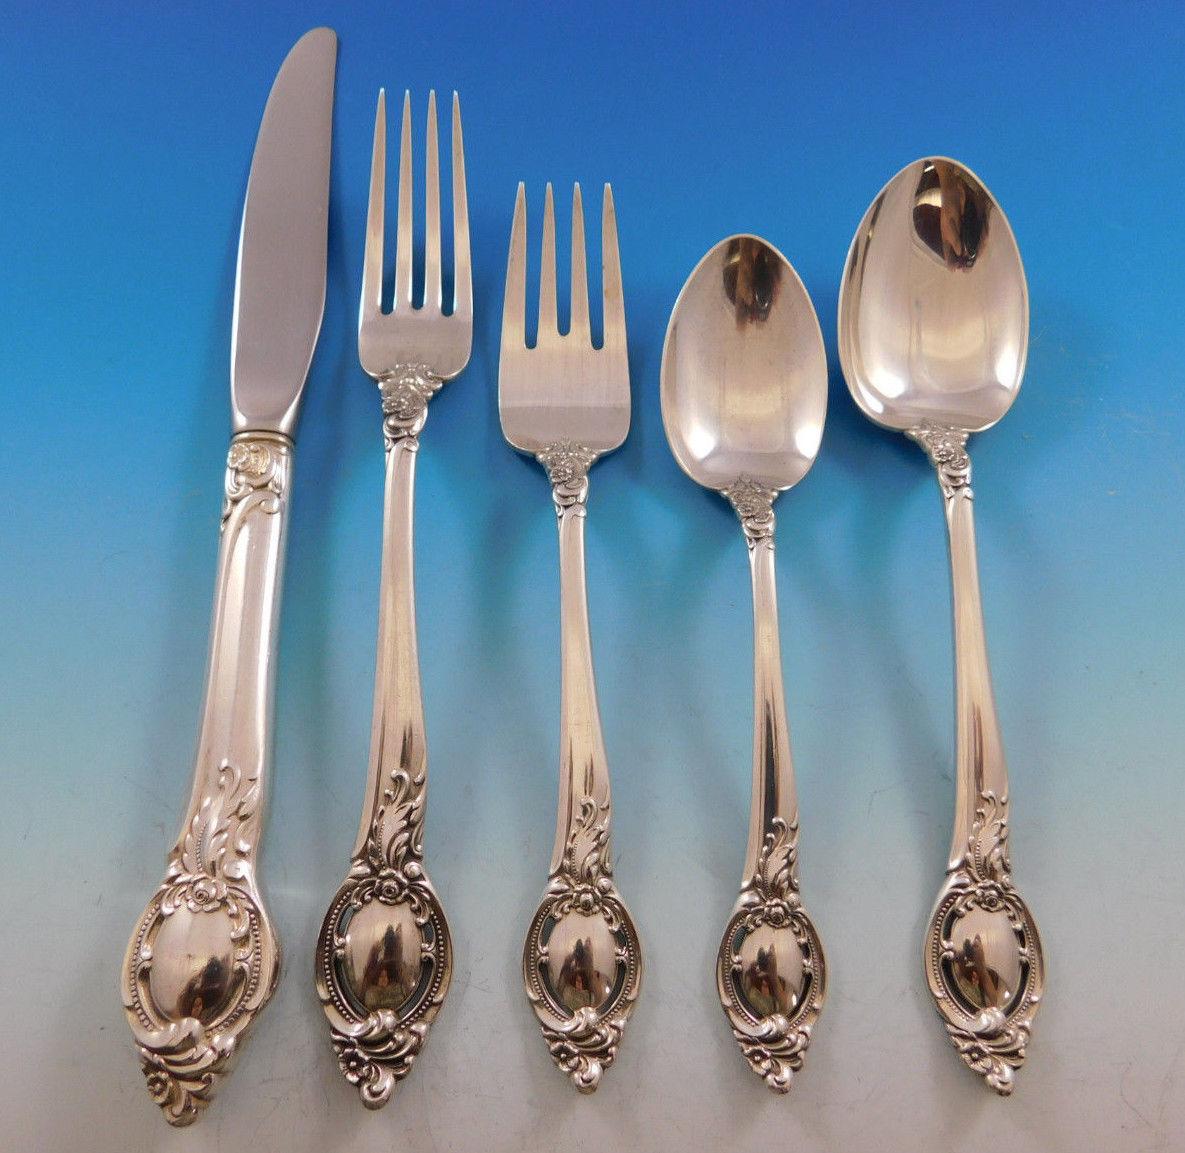 Cameo by Reed & Barton sterling silver flatware set, 42 pieces. This set includes:

Eight knives, 9